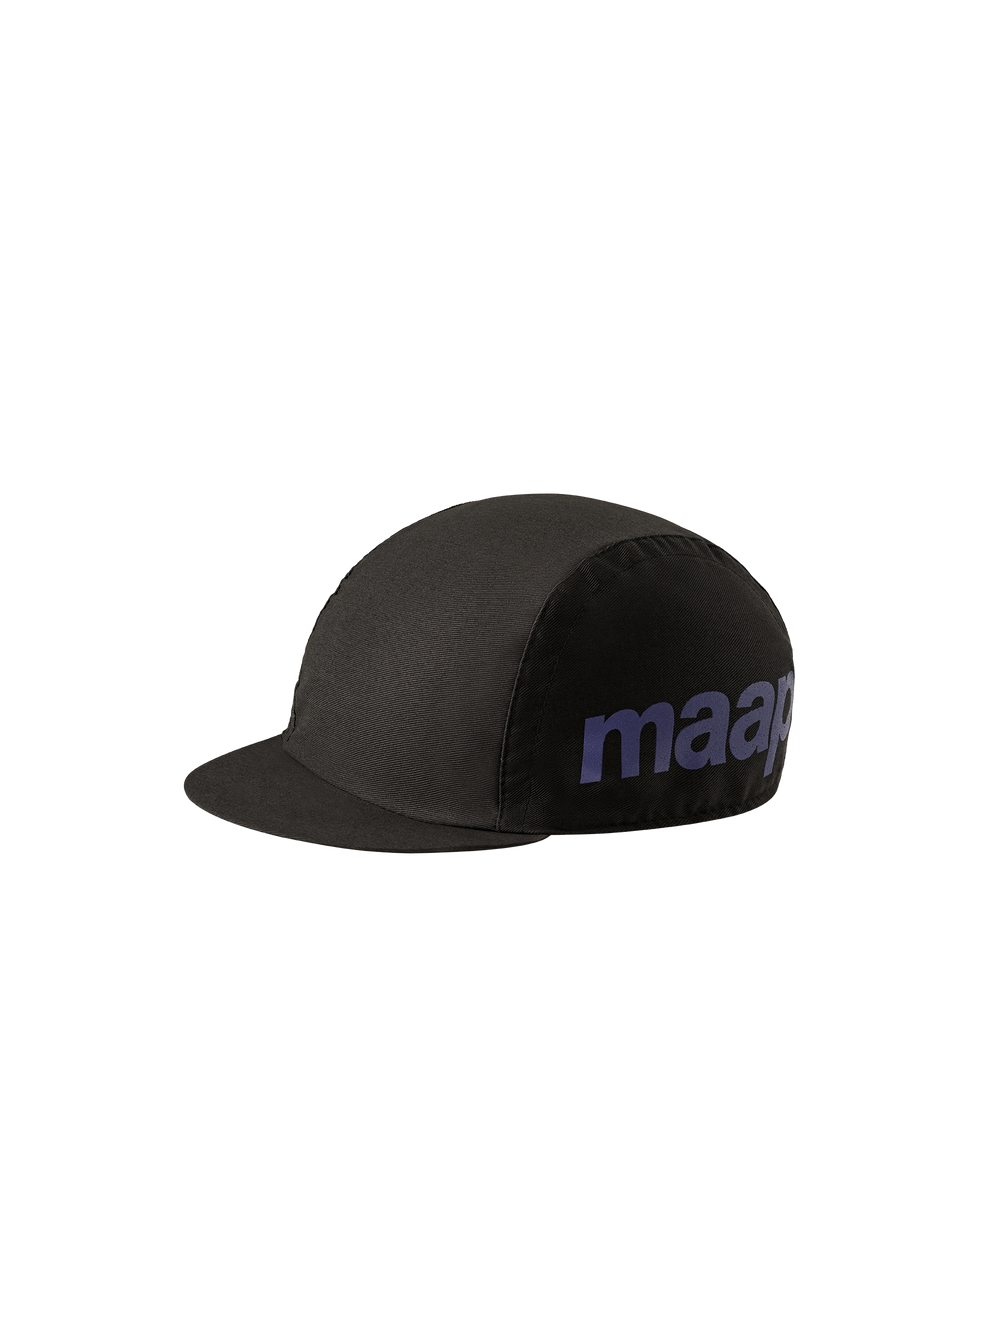 Product Image for Training Cap